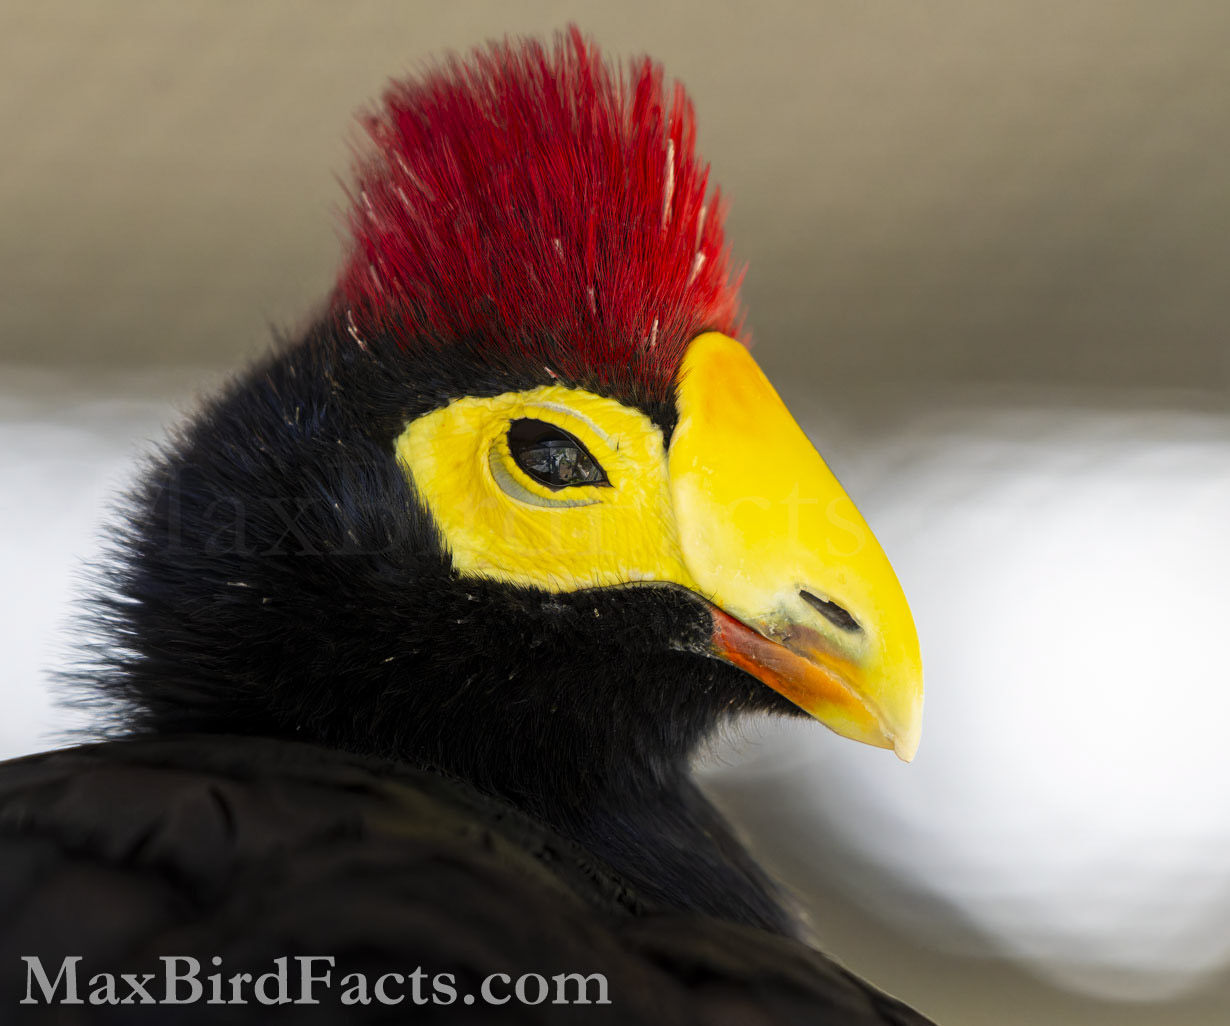 The Ross's Turaco (Musophaga rossae) has beautiful violet plumage and a stunning red crest. Though it might seem to be a dark shade of blue, the violet body plumage is pigmentary from porphyrin coloration. (Scotland Neck, NC. 2023)